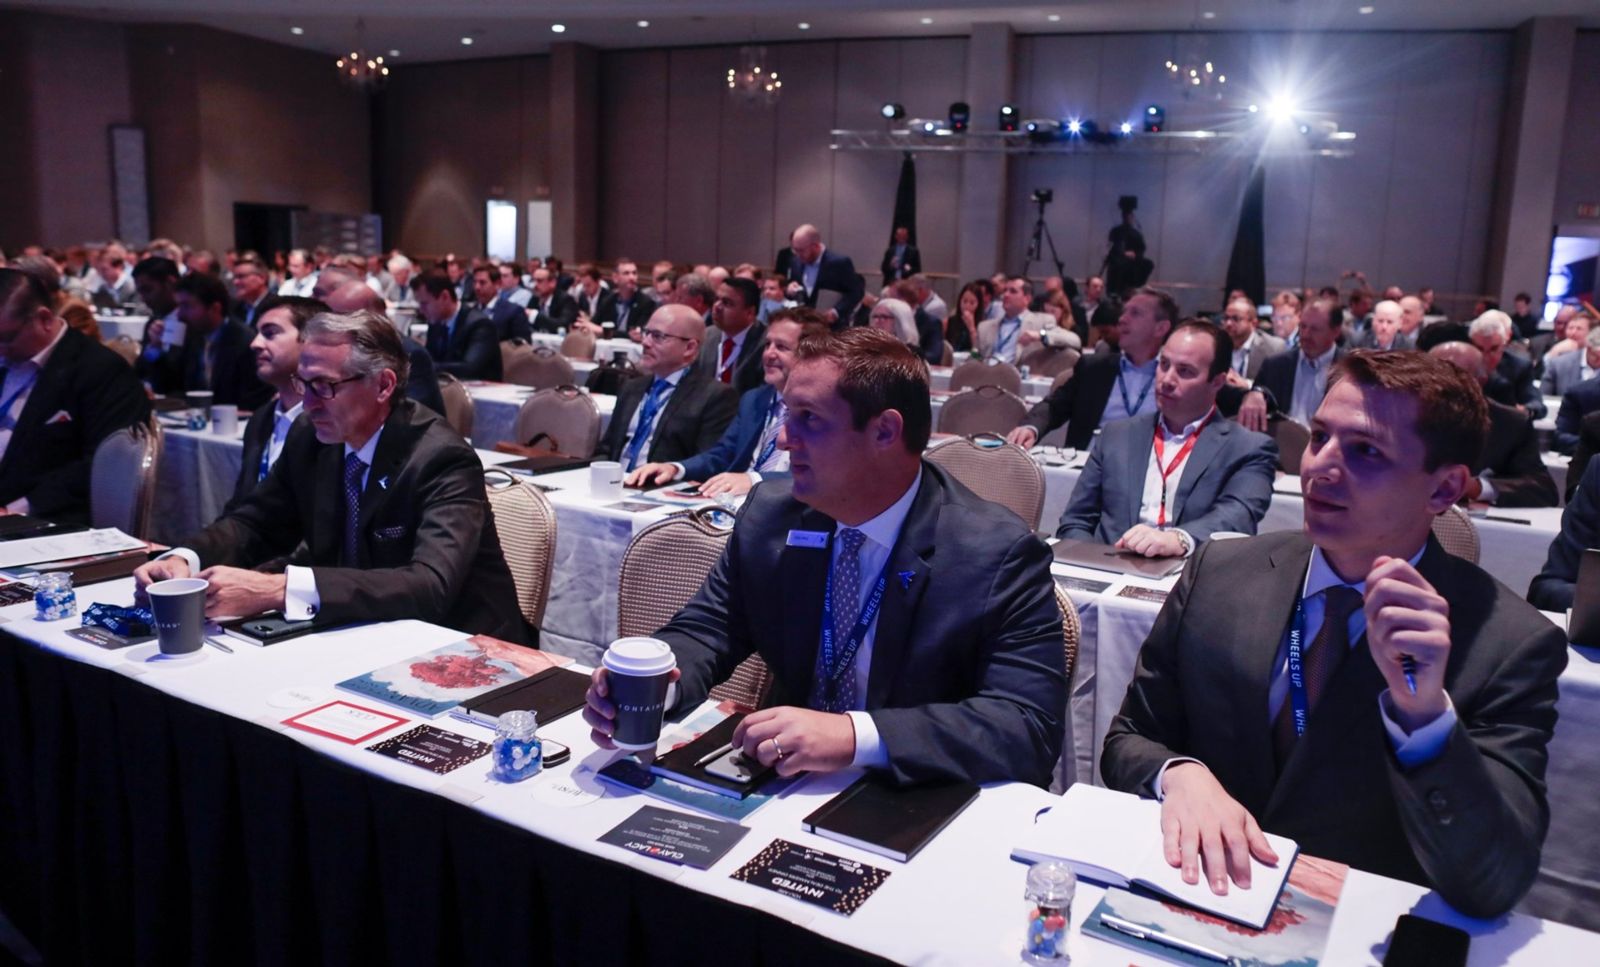 Attendees at the CJI Miami 2019 conference - Corporate Jet Investor